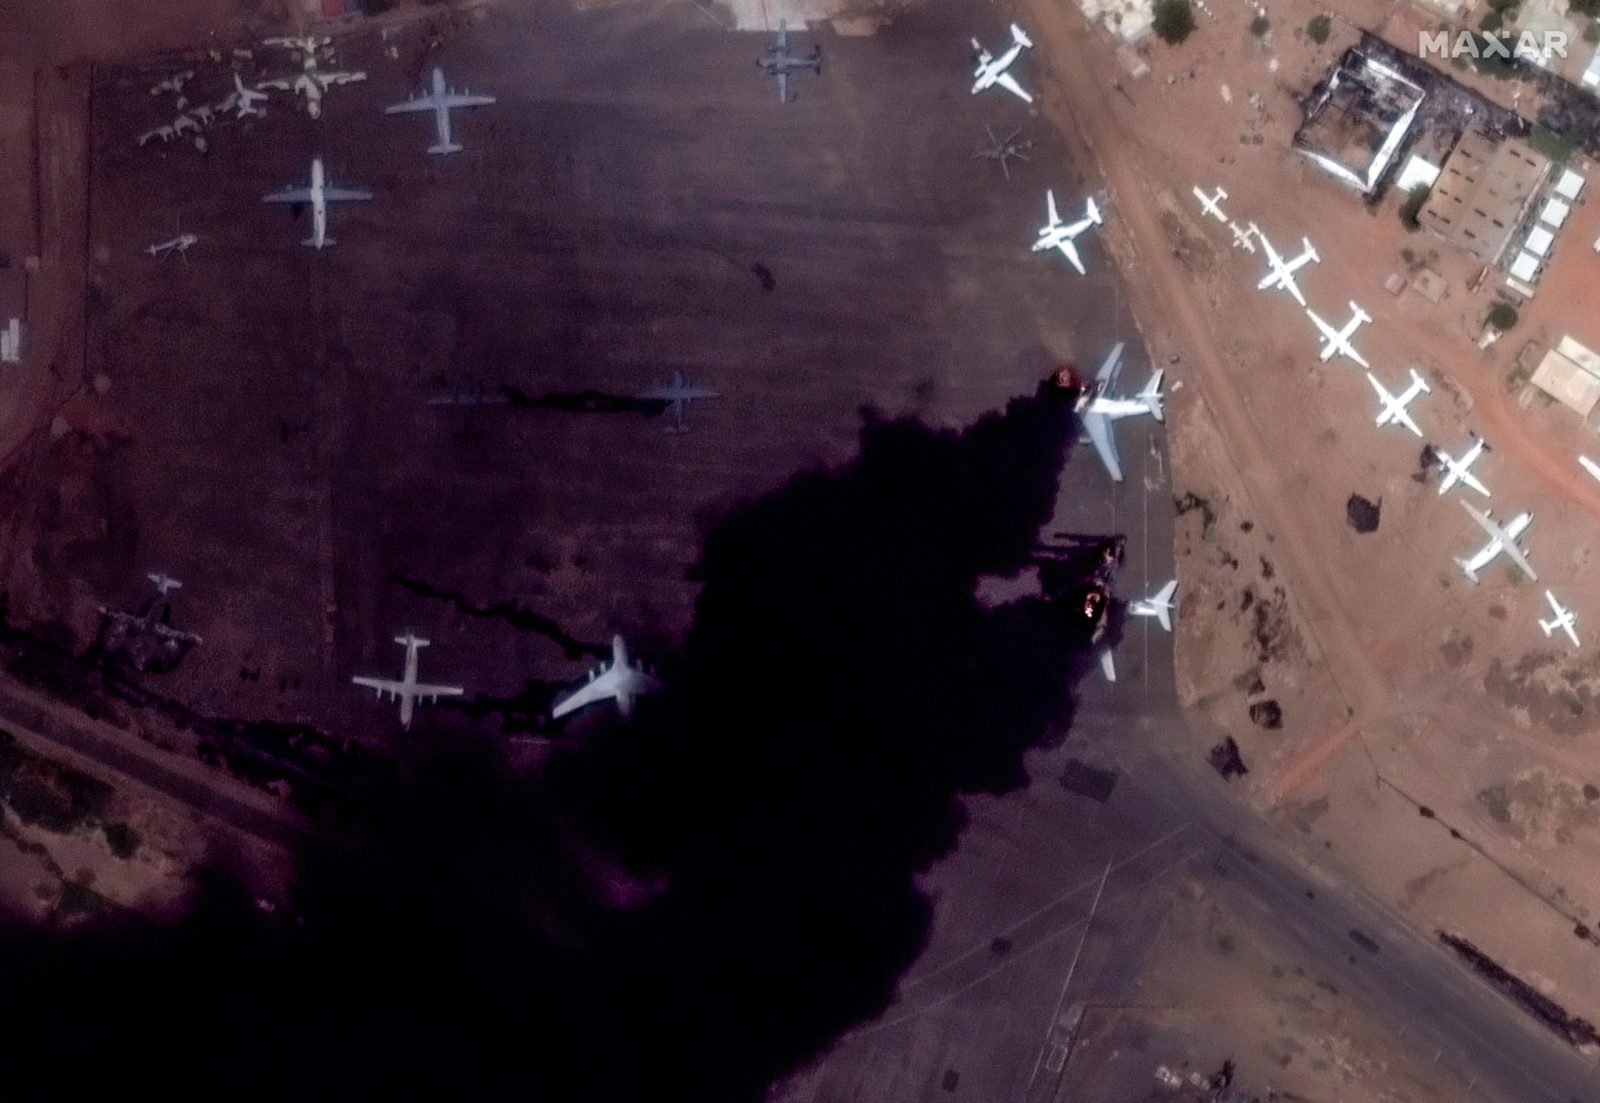 epa10576099 A handout satellite image made available by Maxar Technologies shows burning Il-76 transport aircraft at Khartoum International Airport, in Khartoum, Sudan, 16 April 2023. Heavy gunfire and explosions were reported in Sudan's capital Khartoum on 15 April between the army and a paramilitary group following days of tension centering around the country's proposed transition to civilian rule.  EPA/MAXAR TECHNOLOGIES HANDOUT -- MANDATORY CREDIT: SATELLITE IMAGE 2023 MAXAR TECHNOLOGIES -- THE WATERMARK MAY NOT BE REMOVED/CROPPED -- HANDOUT EDITORIAL USE ONLY/NO SALES